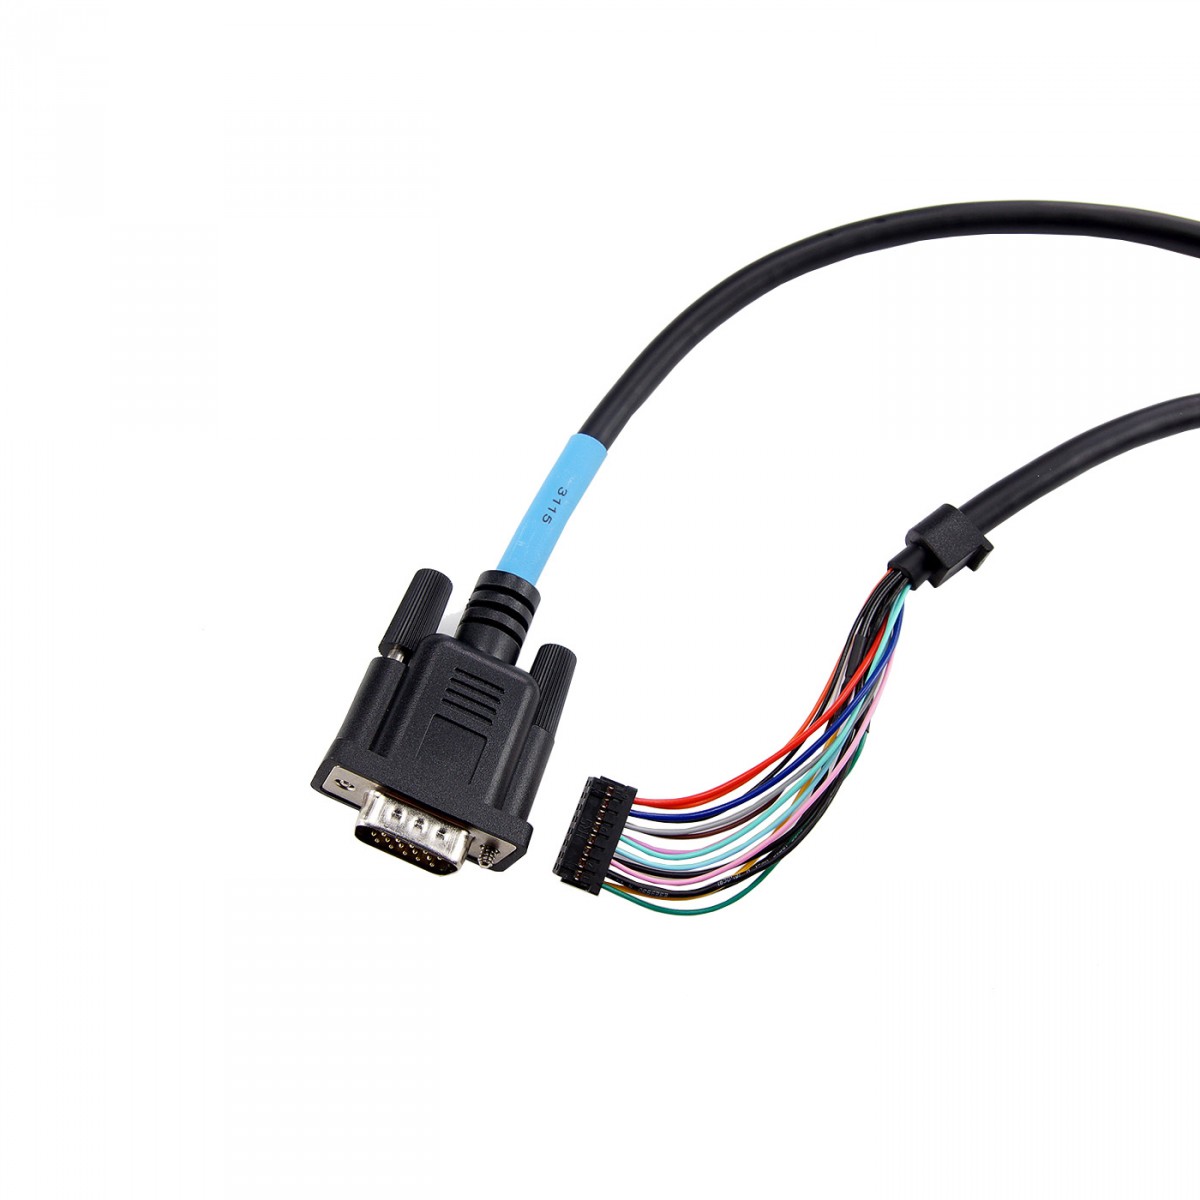 SEPURA connection cable 05m for remote control 0659129 300-00069